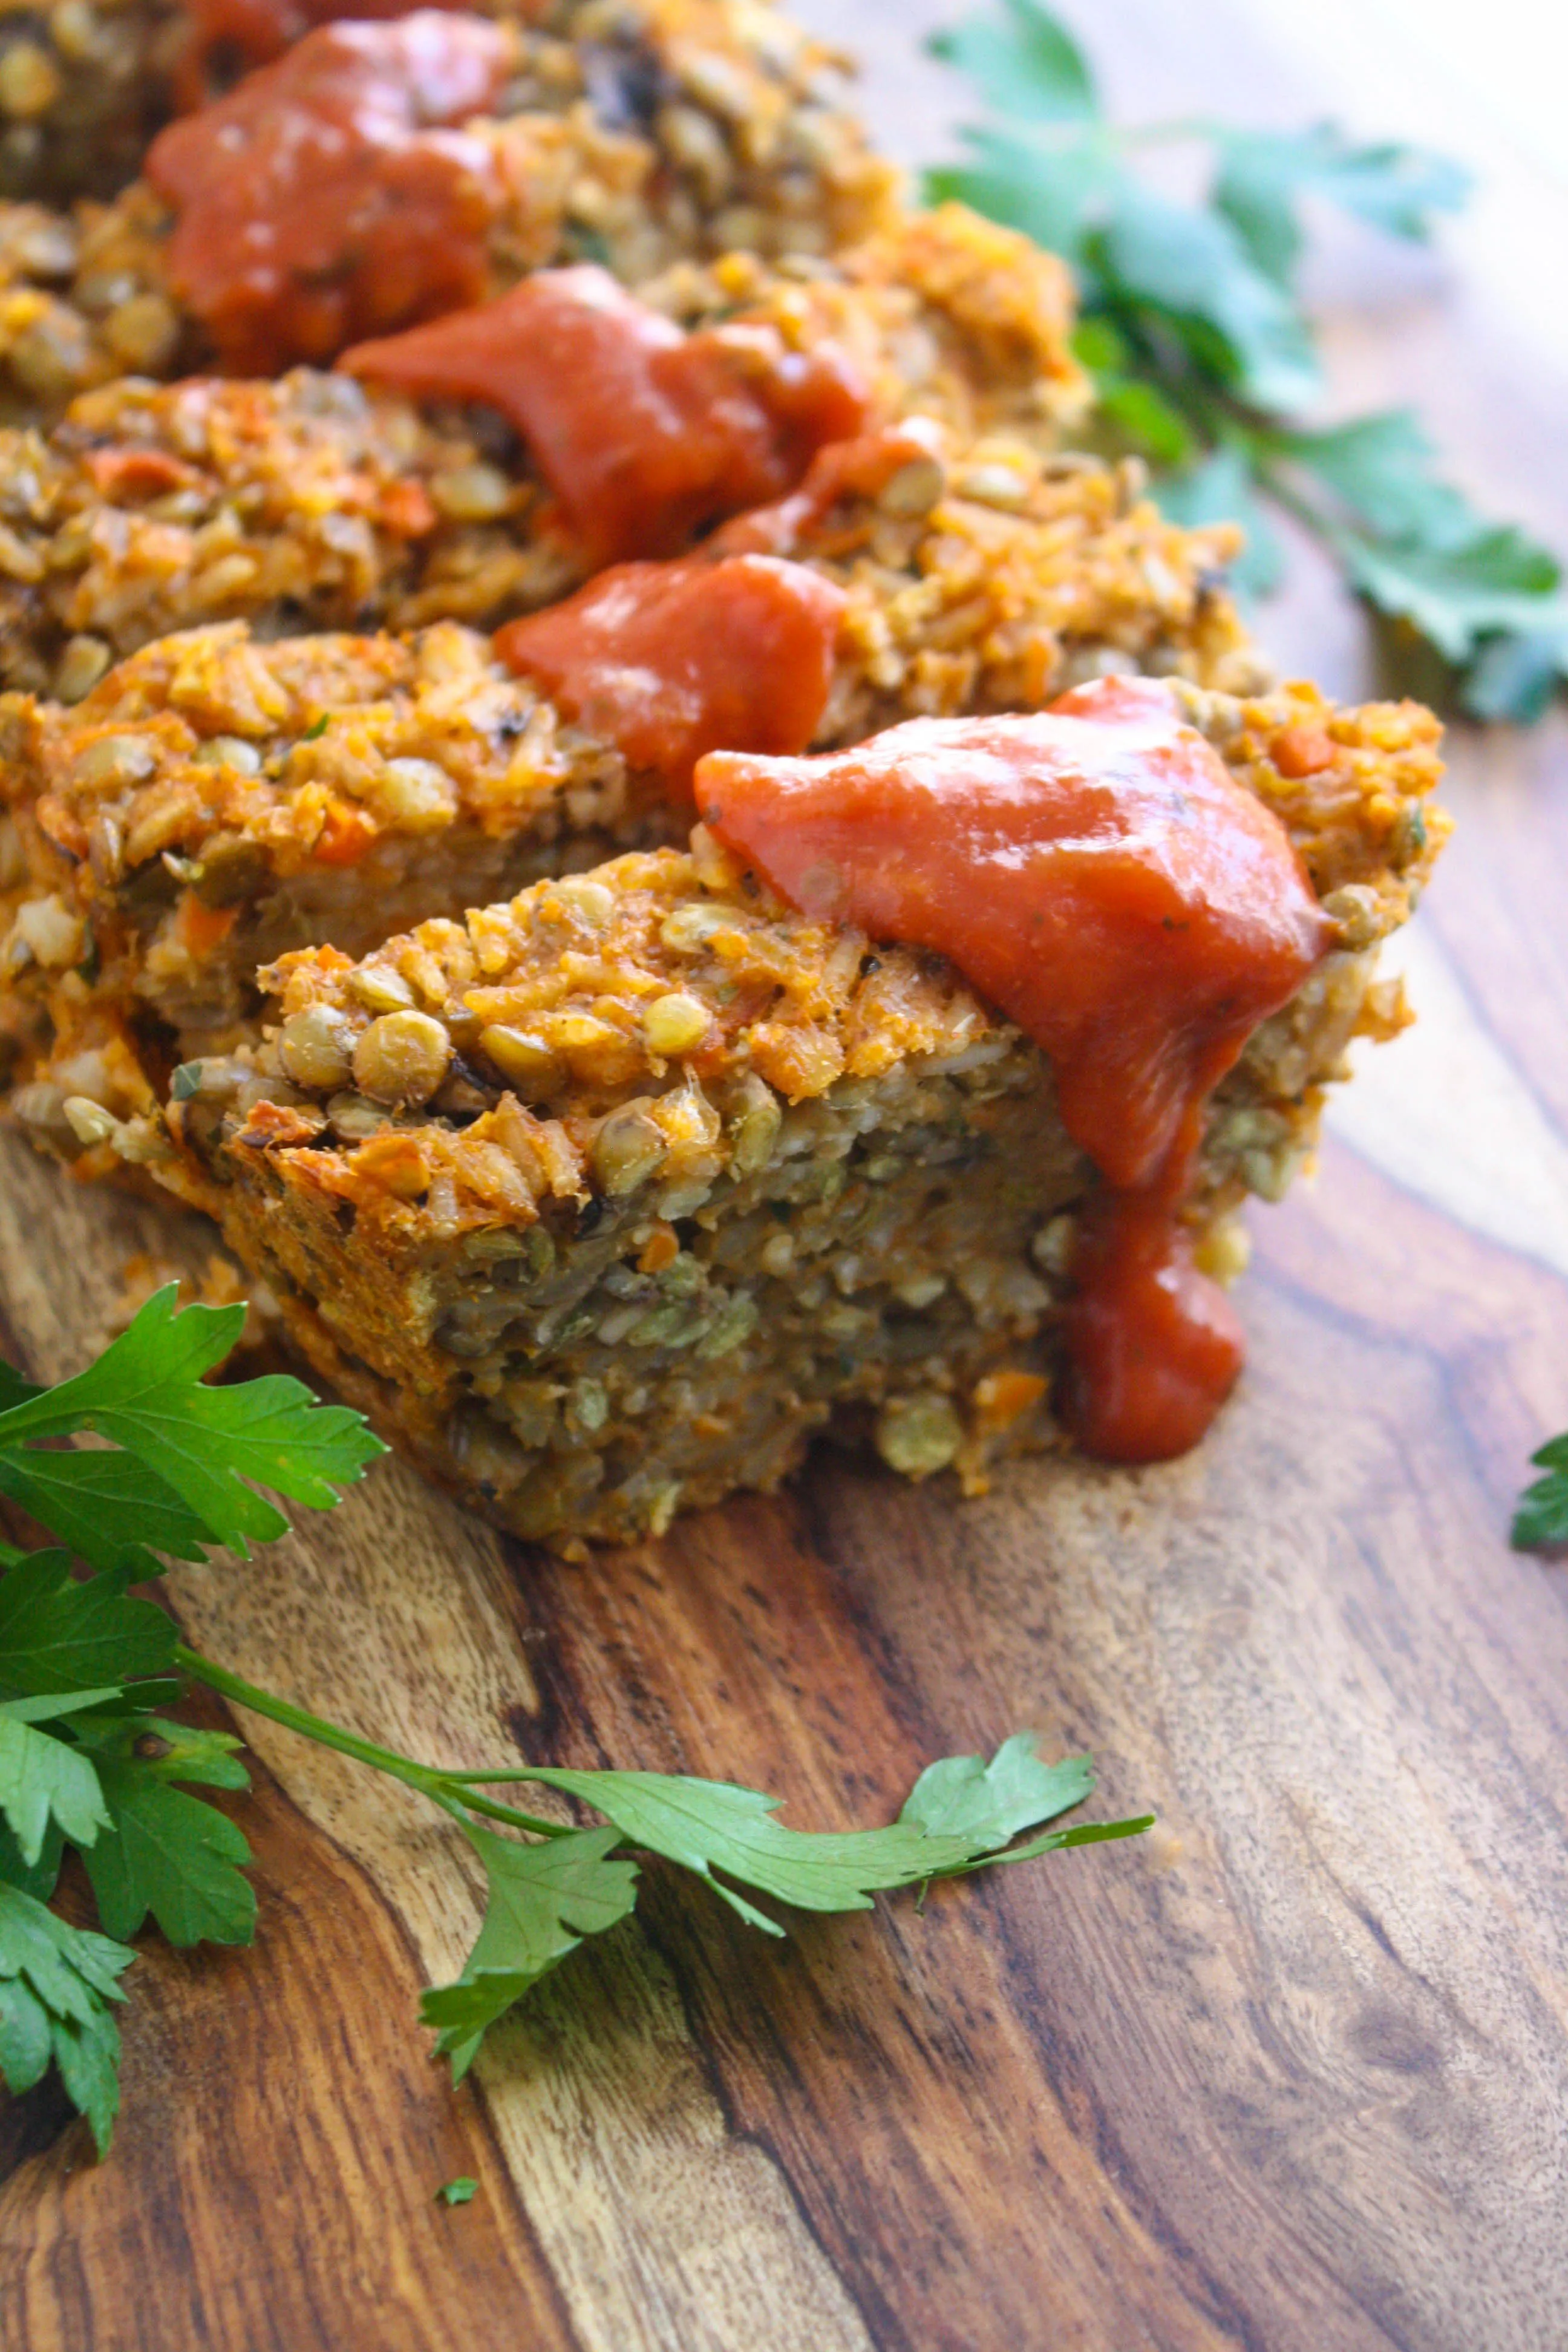 Rice and Lentil Loaf is a wonderful and hearty vegetarian option of a classic meal. You'll love this hearty and comforting dish.